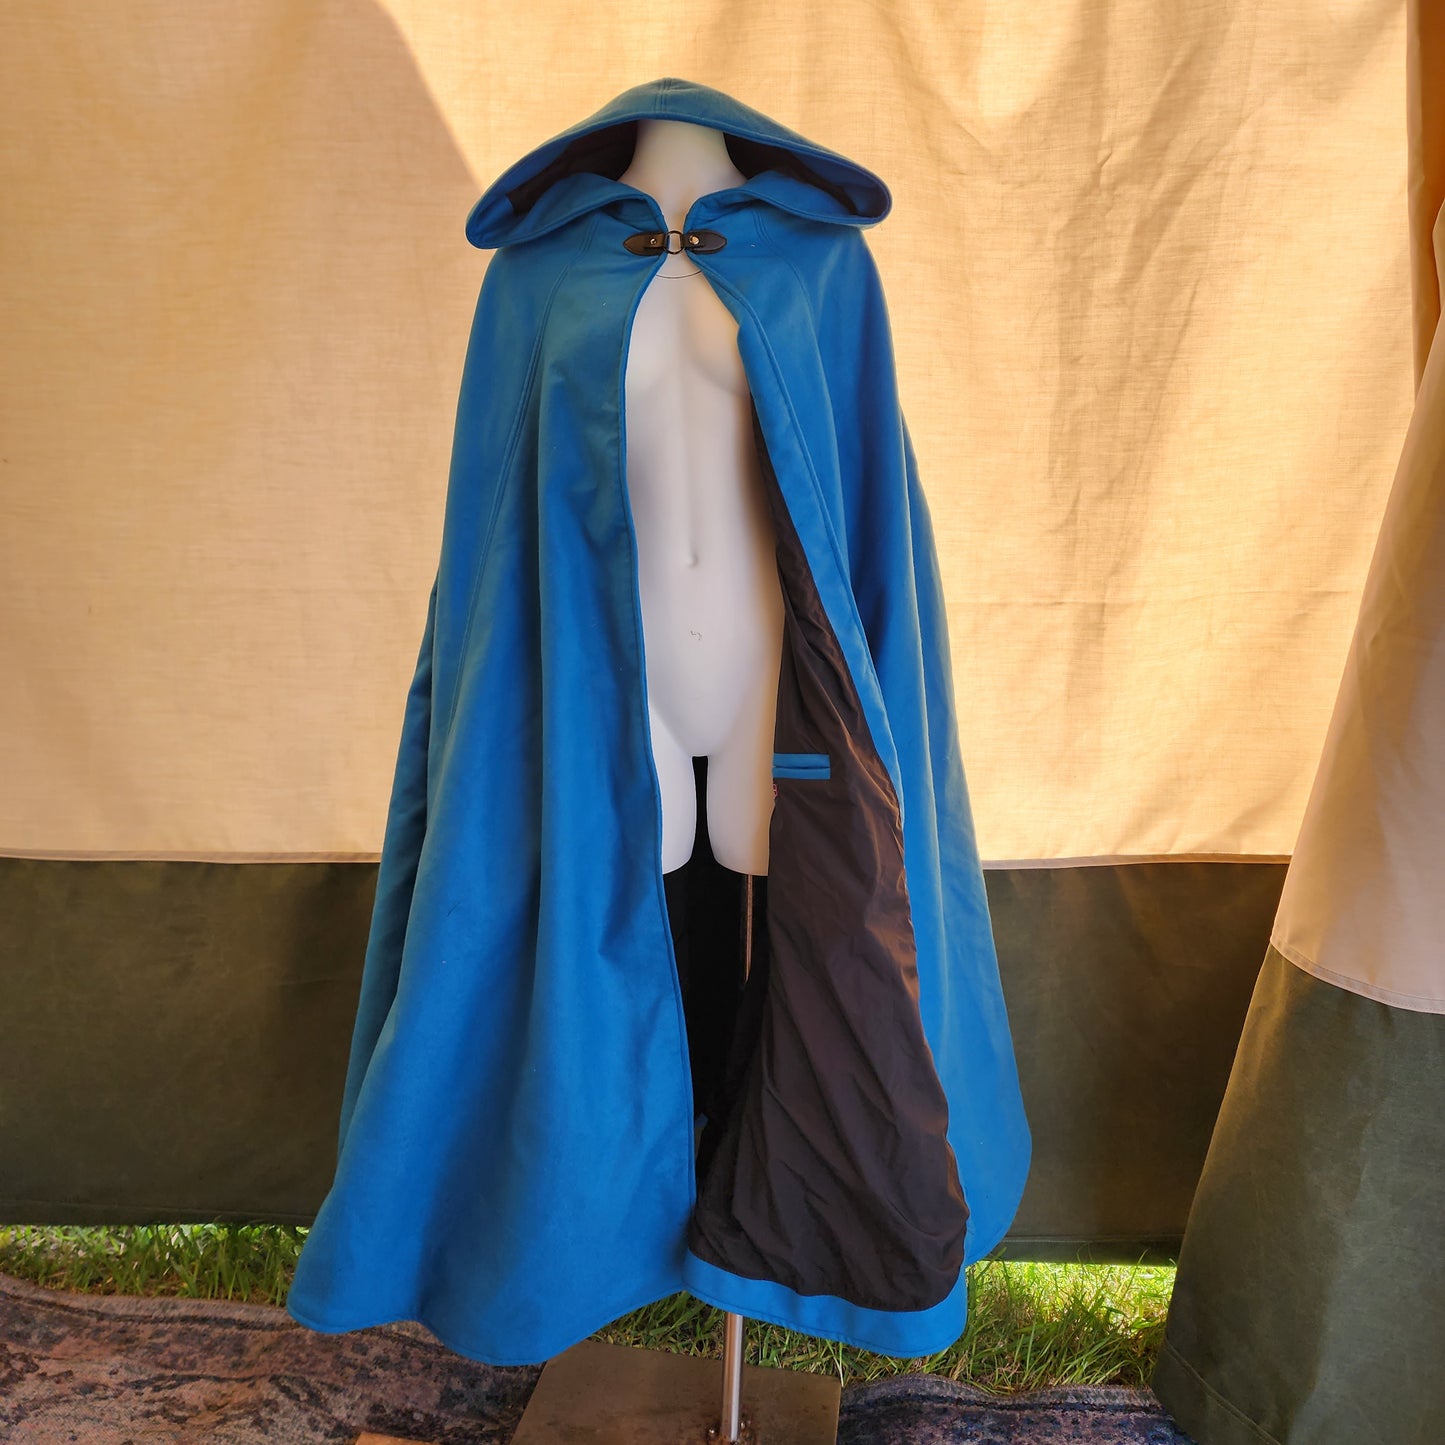 Winter Wanderer Cloak- Turquoise Cloak with Black Water Resistant Lining